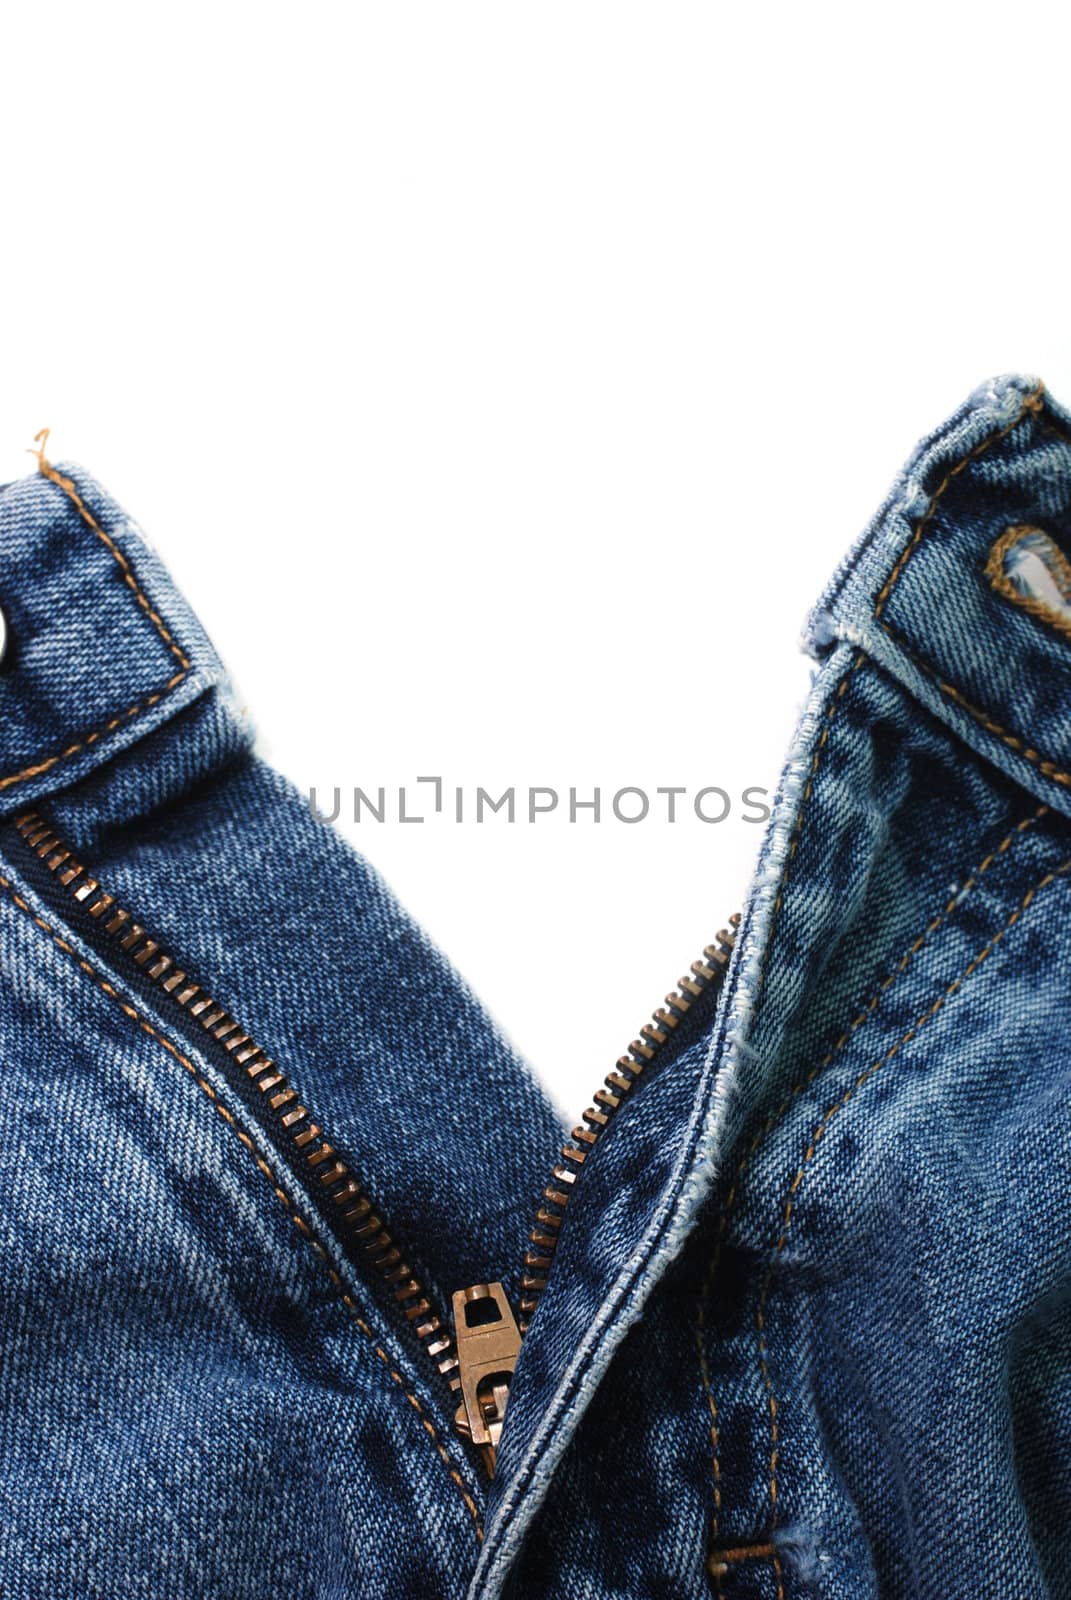 Closeup of zipper in blue jeans isolated on white background.